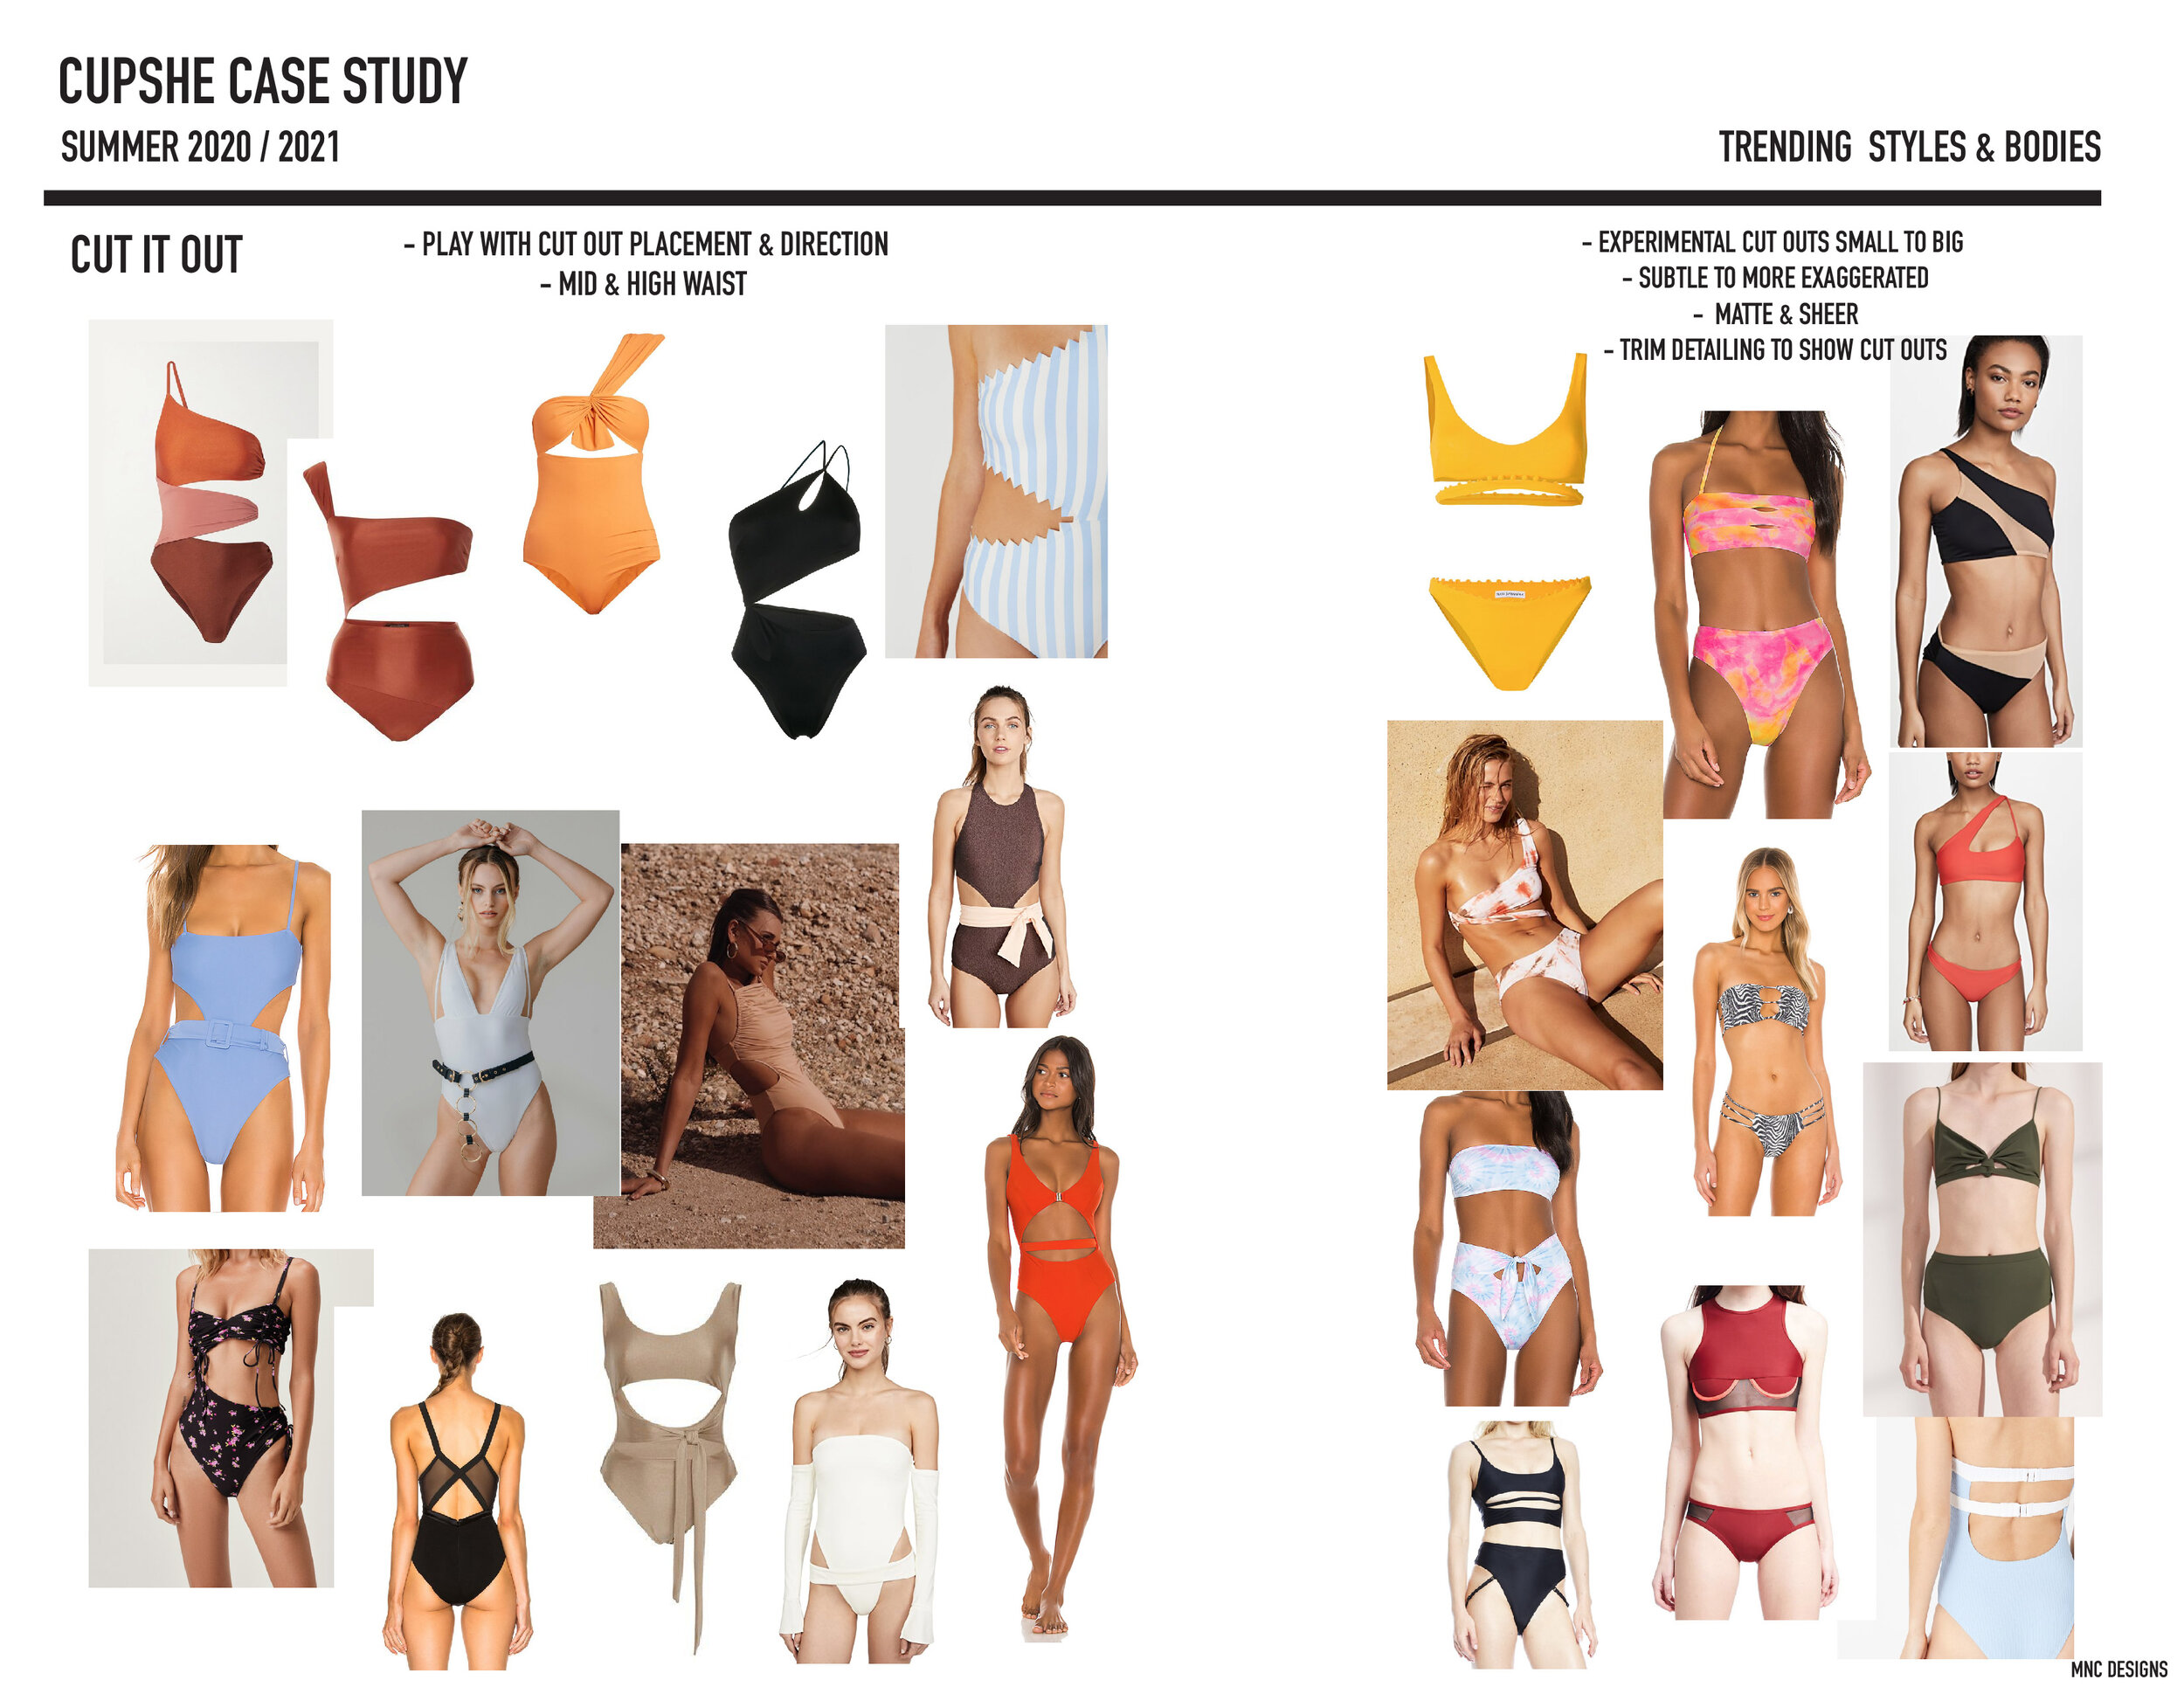 CUPSHE SS20 DESIGN BRIEF CASE STUDY_Page_6.jpg